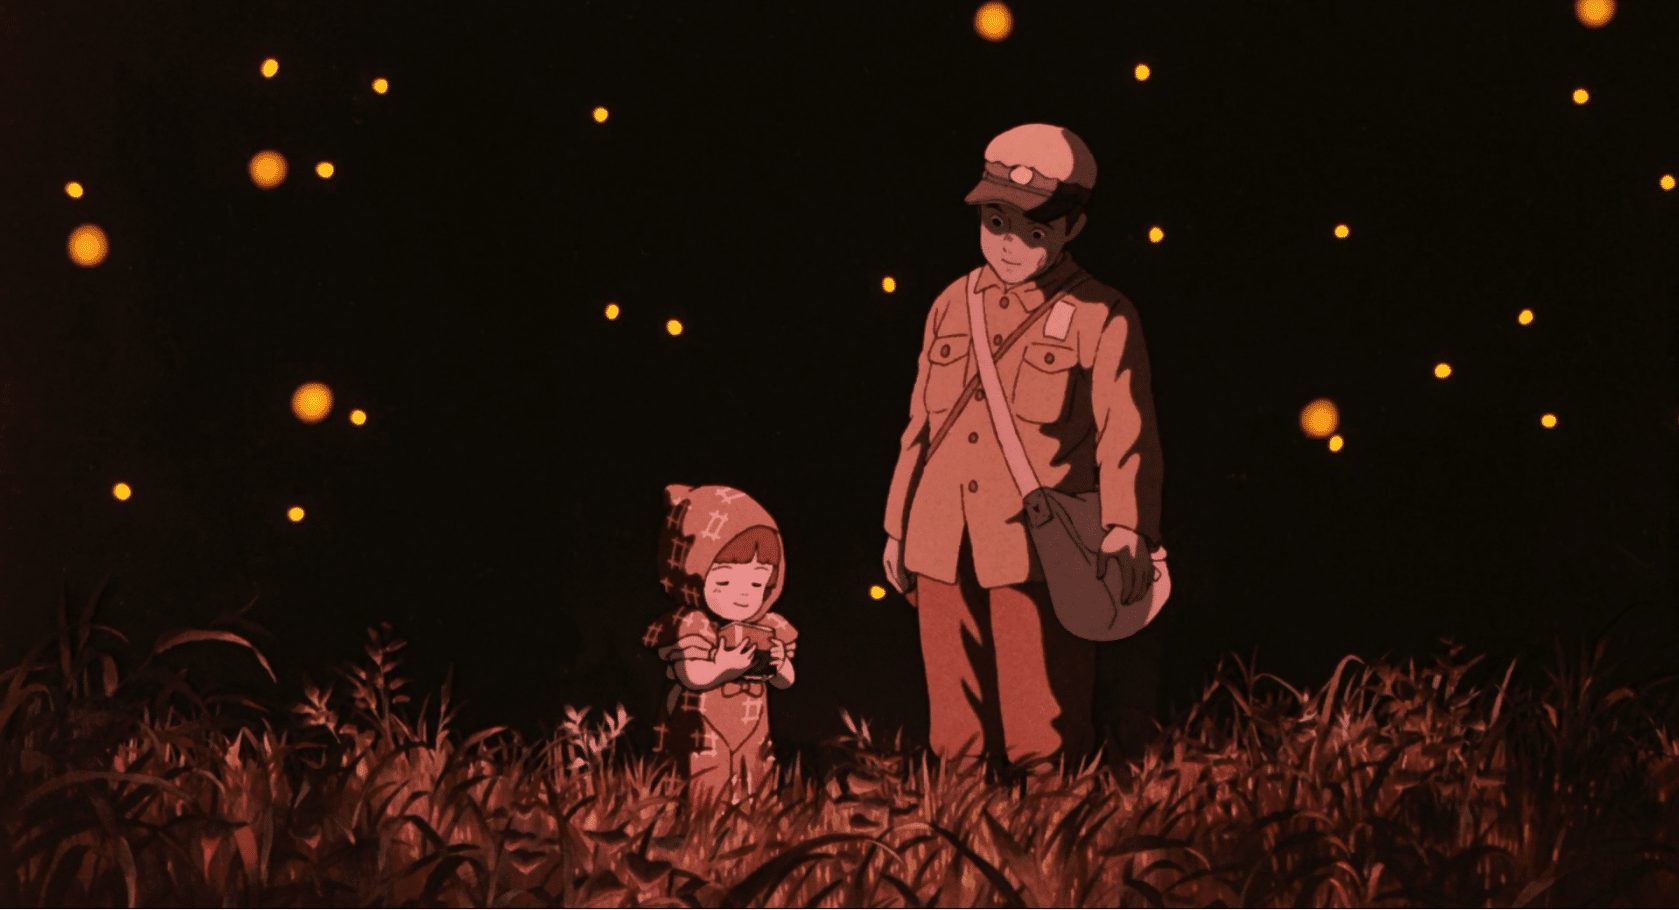 http://www.moviesteve.com/wp-content/uploads/2014/08/grave-of-the-fireflies.png